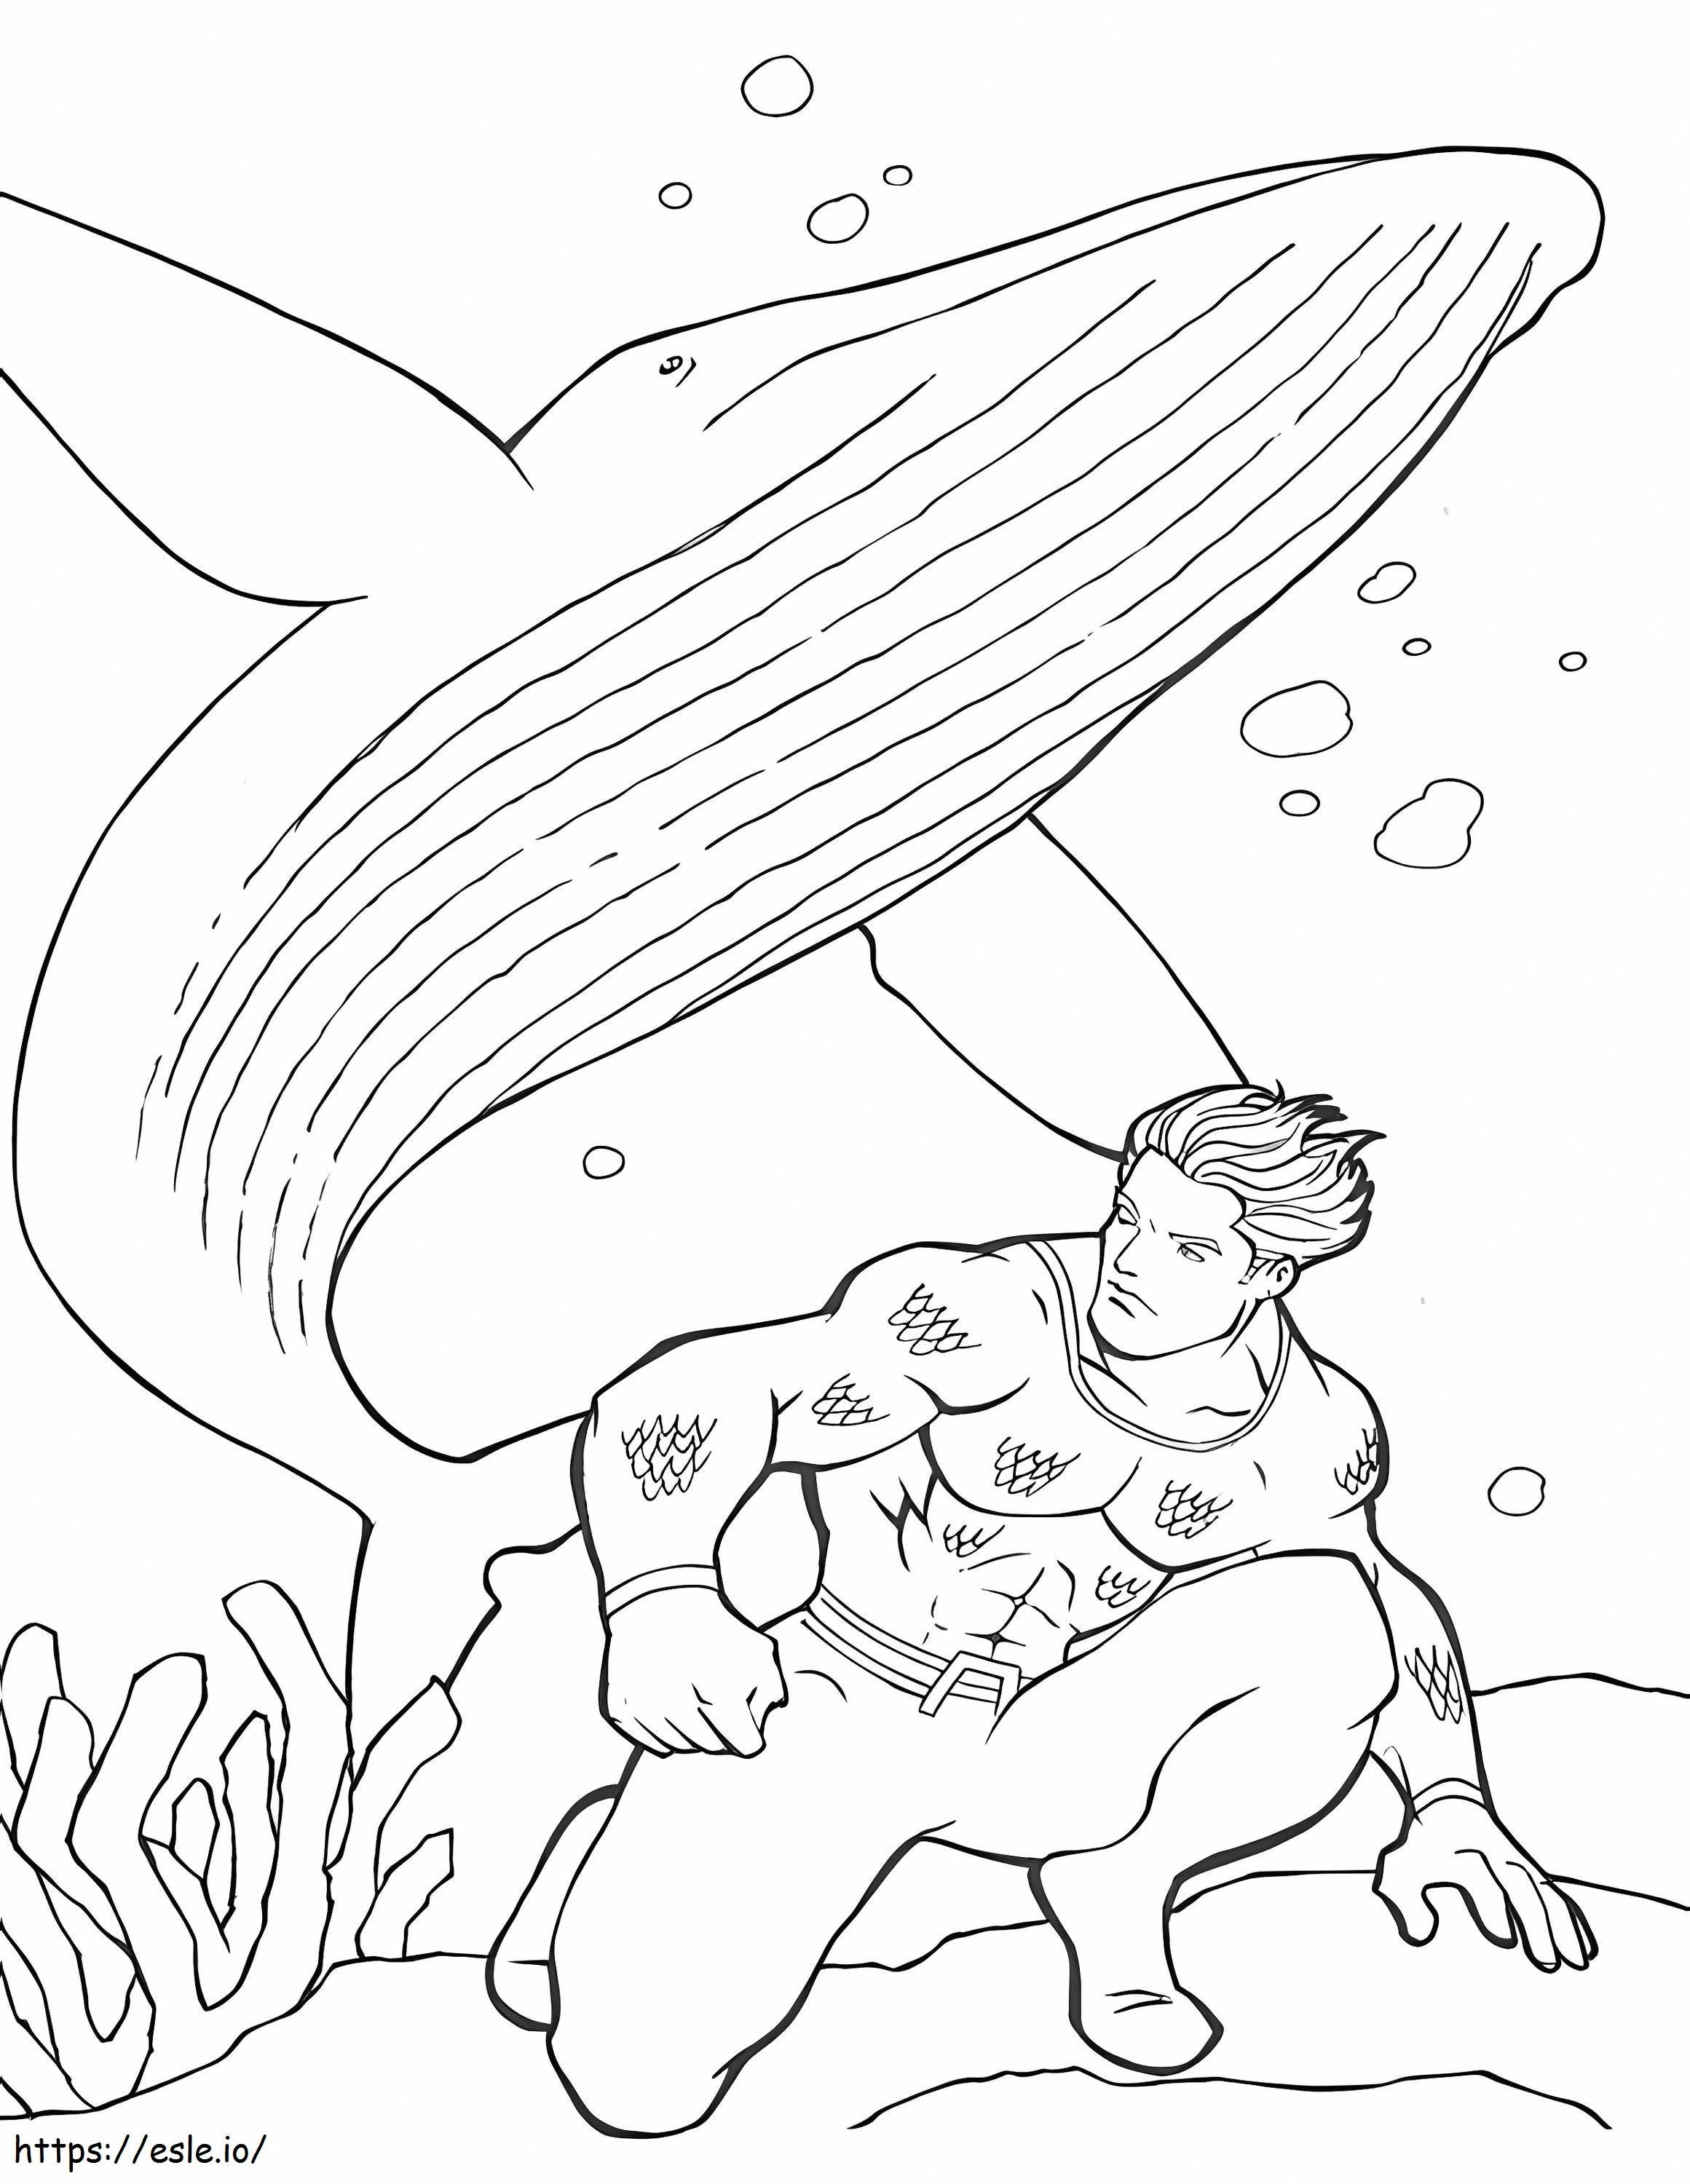 Aquaman And Whale coloring page